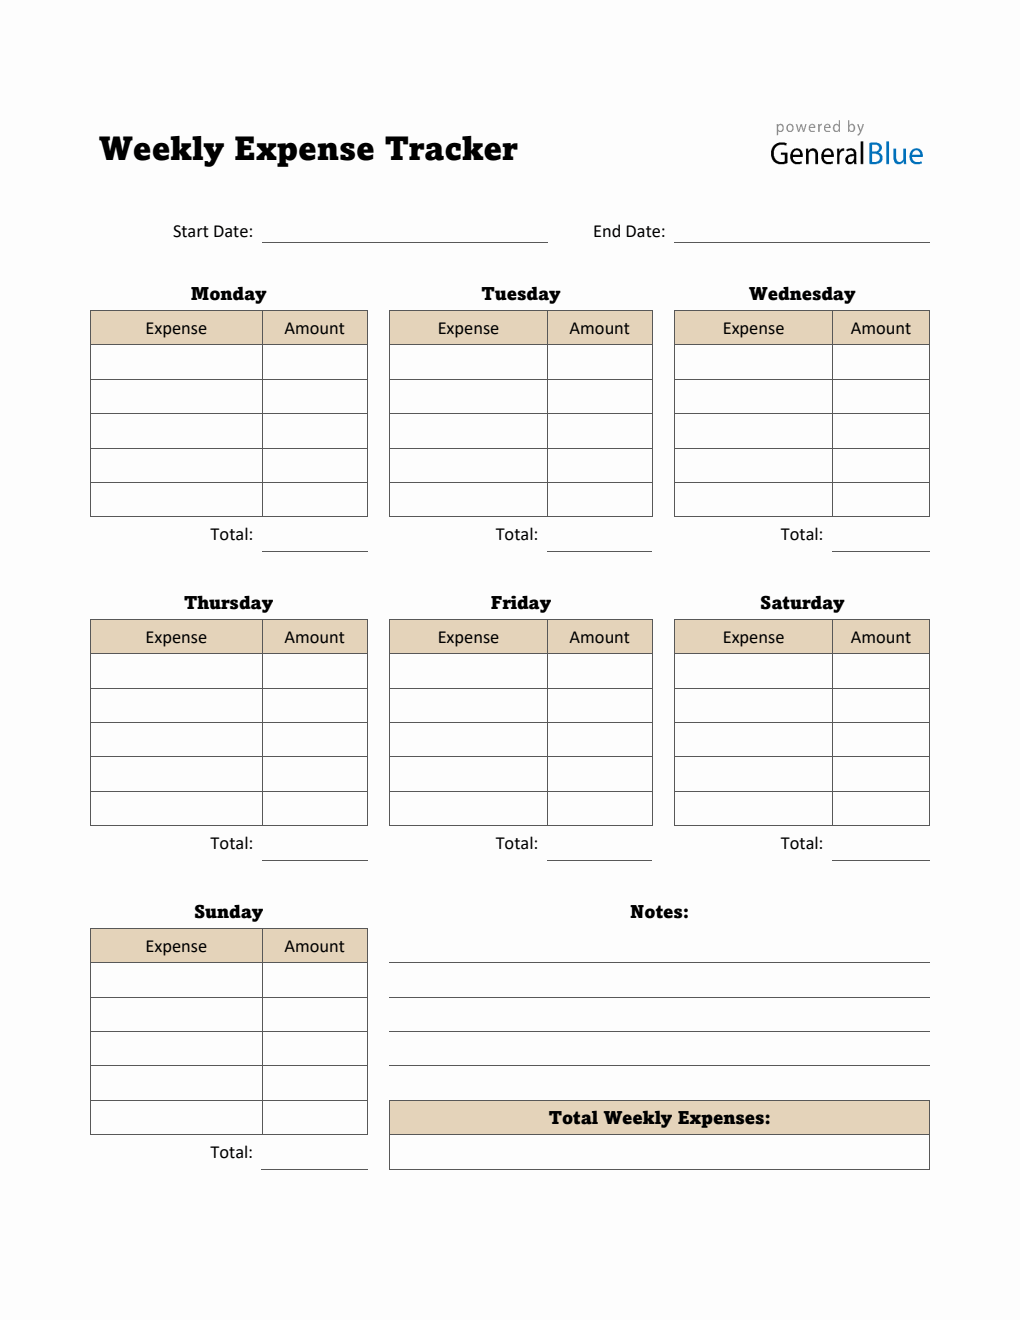 Weekly Expense Tracker in PDF (Simple)